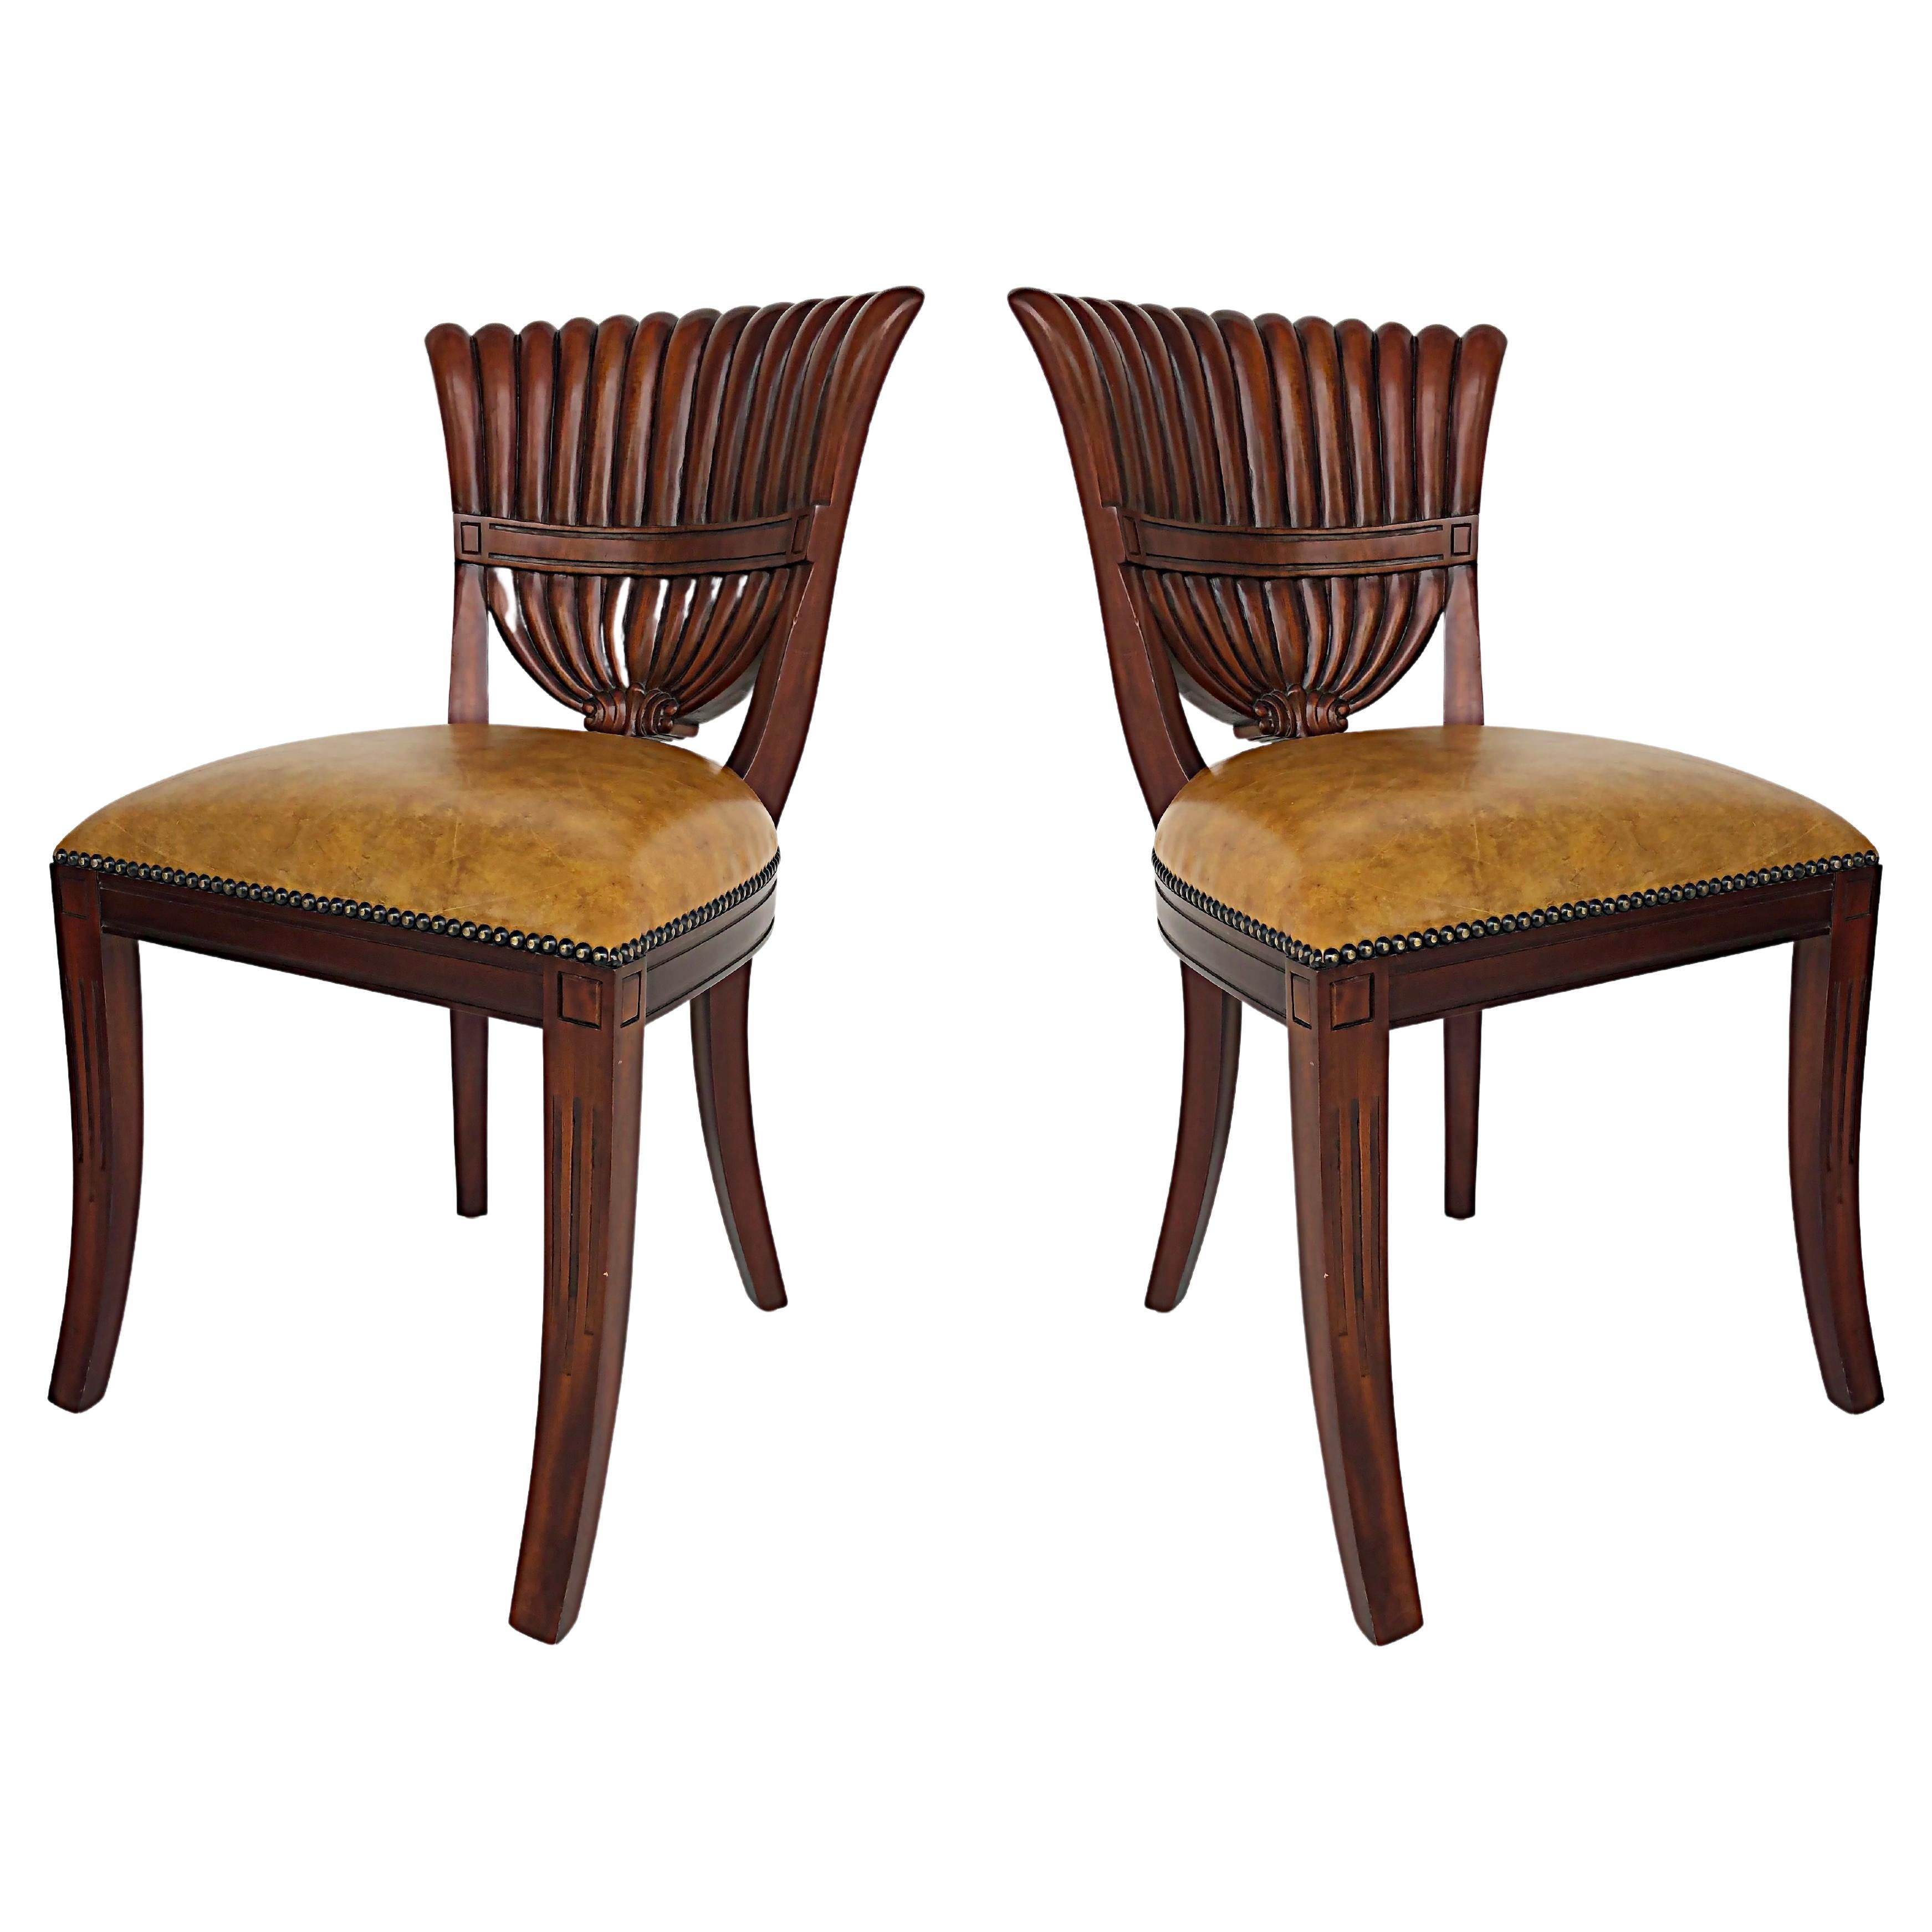 Maitland Smith Carved Wood Side Chairs, Nailhead Detail Trim, Pair